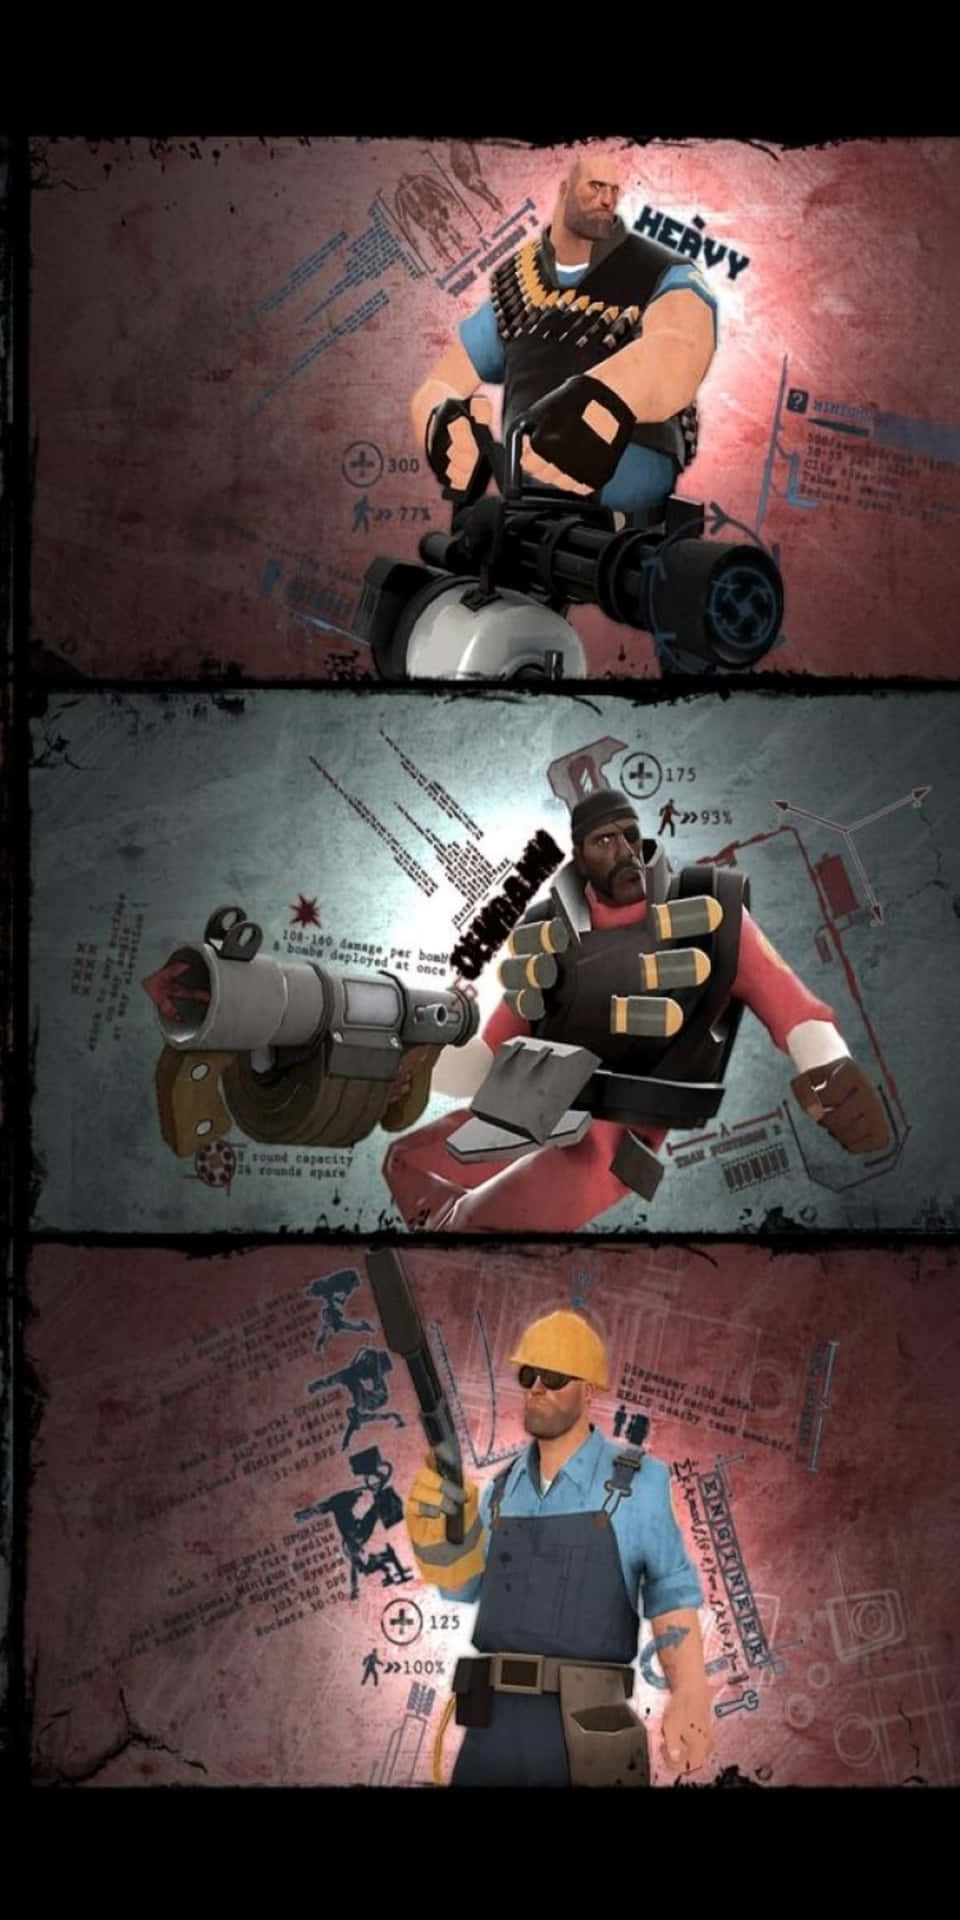 Exciting Pixel 3 TF2 gaming background in stunning High Definition